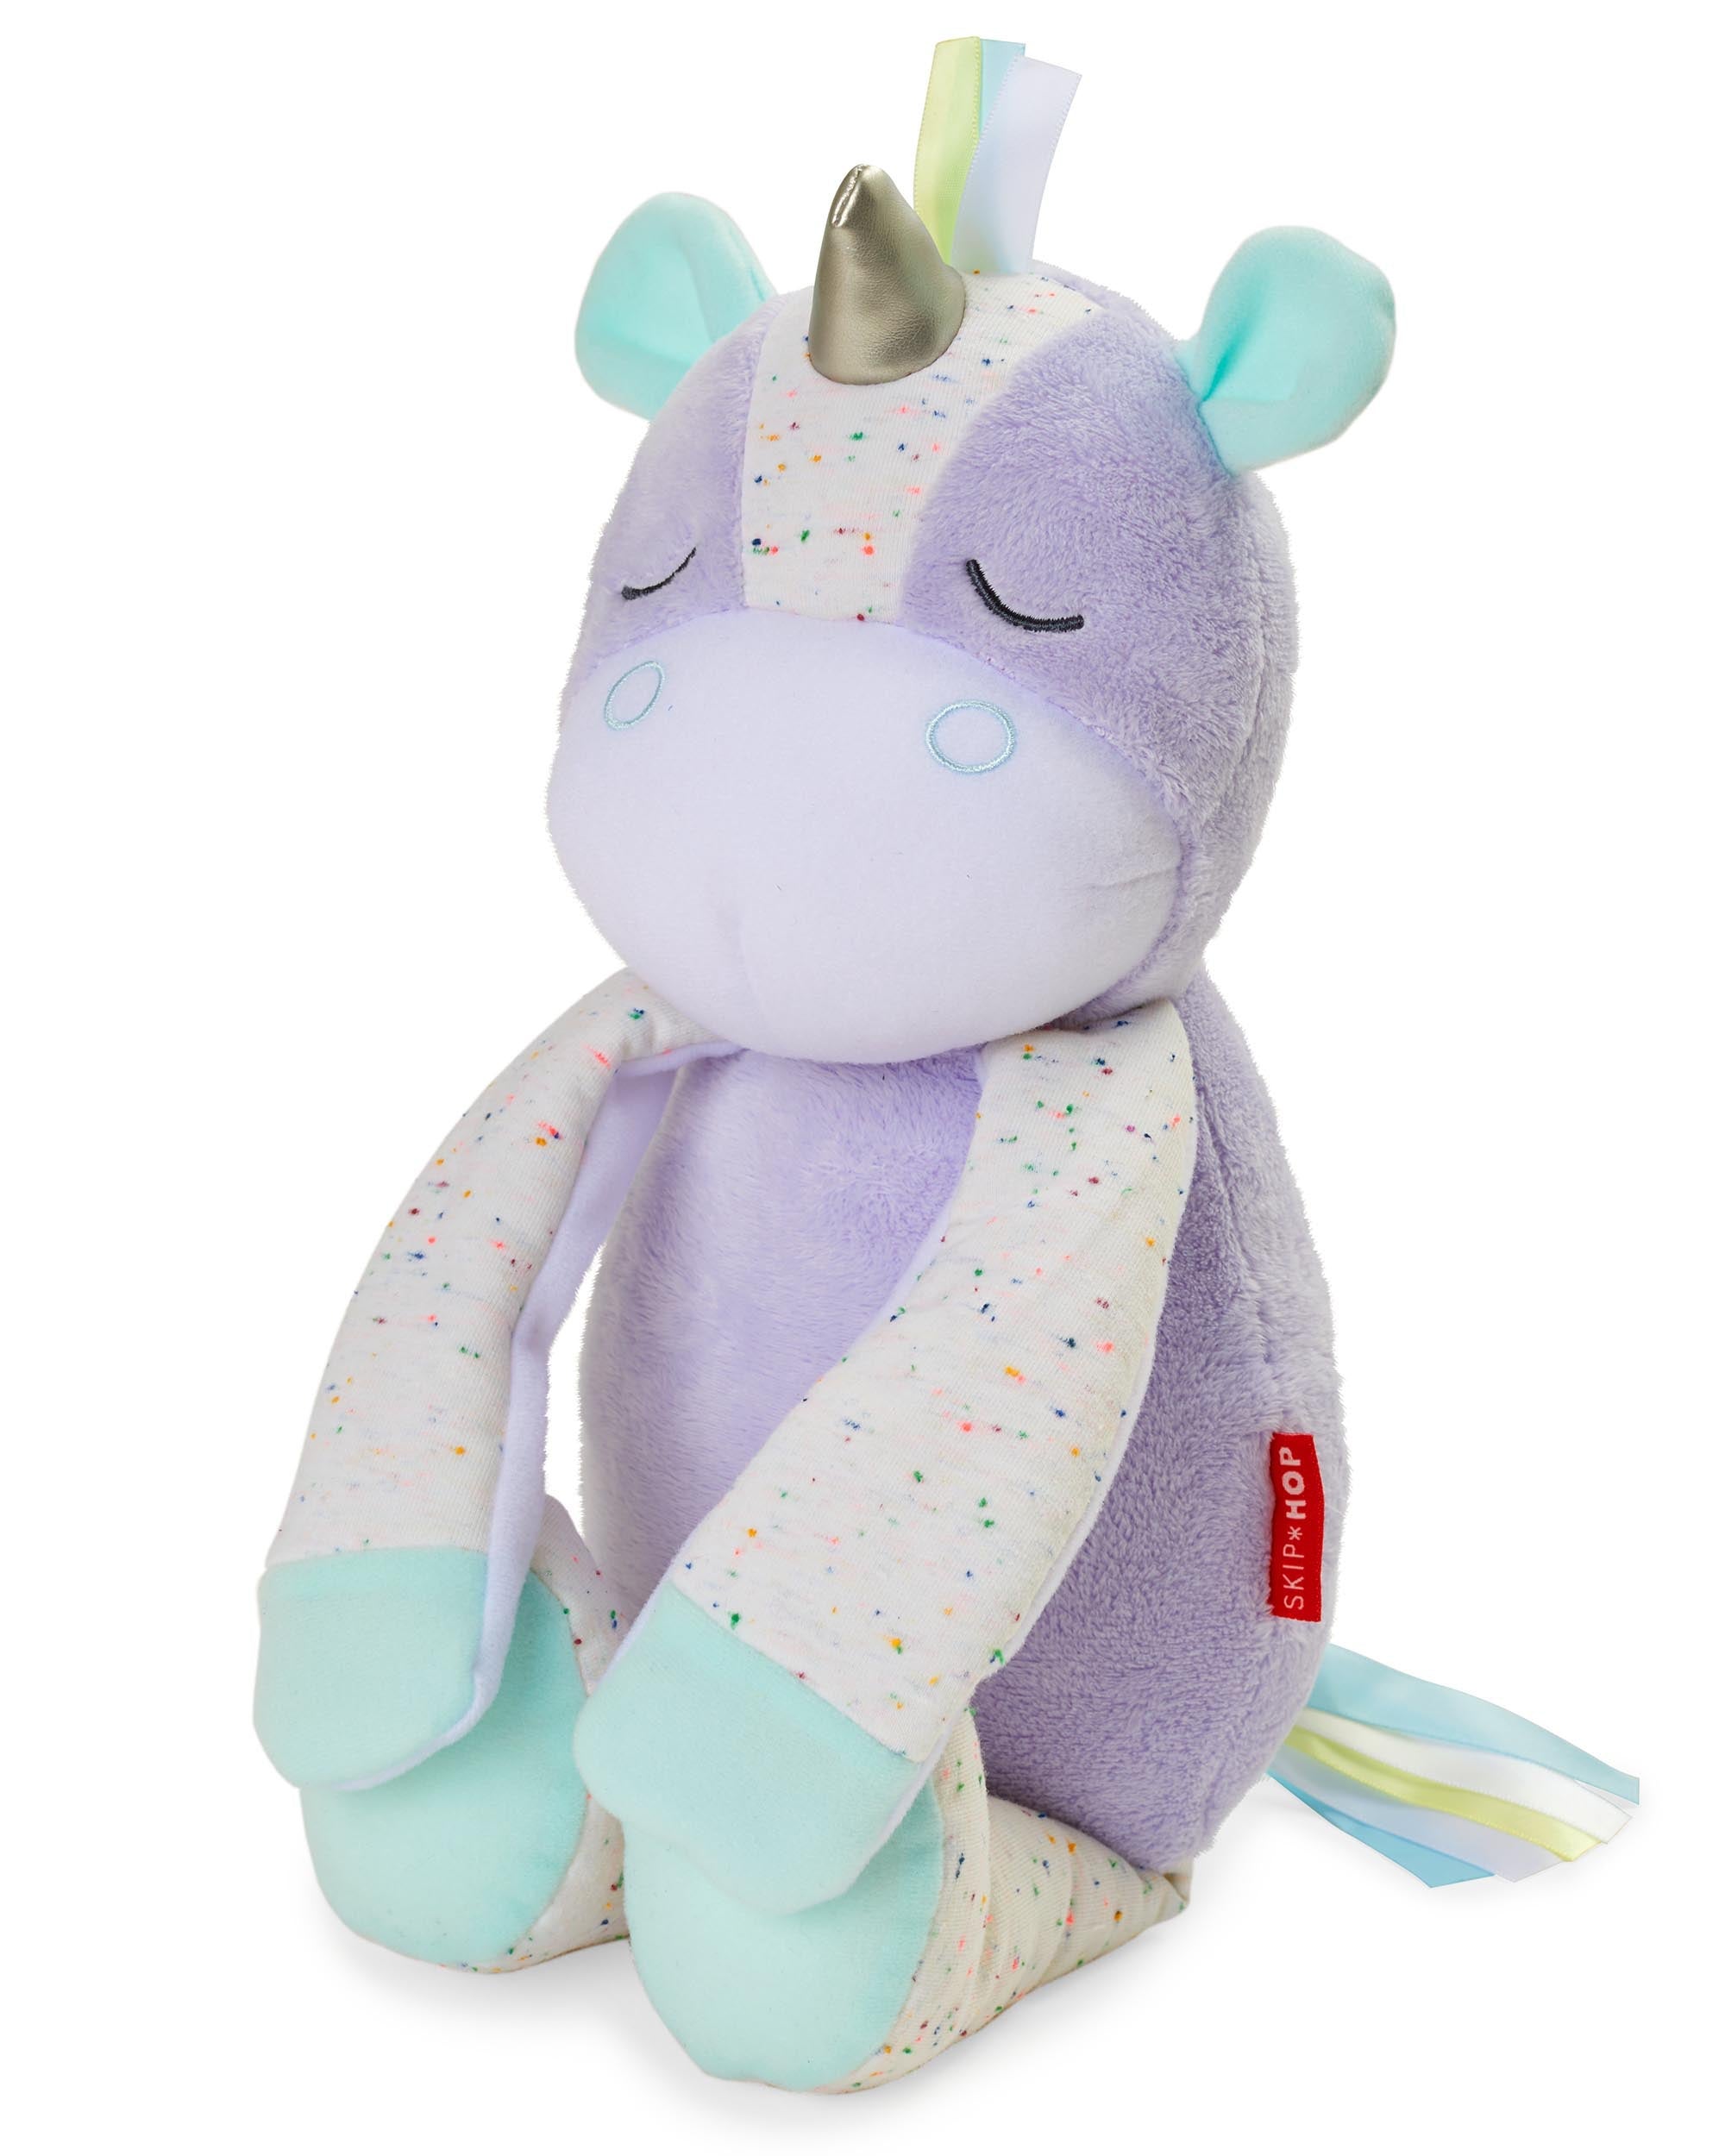 Skip Hop Cry Activated Soother - Unicorn